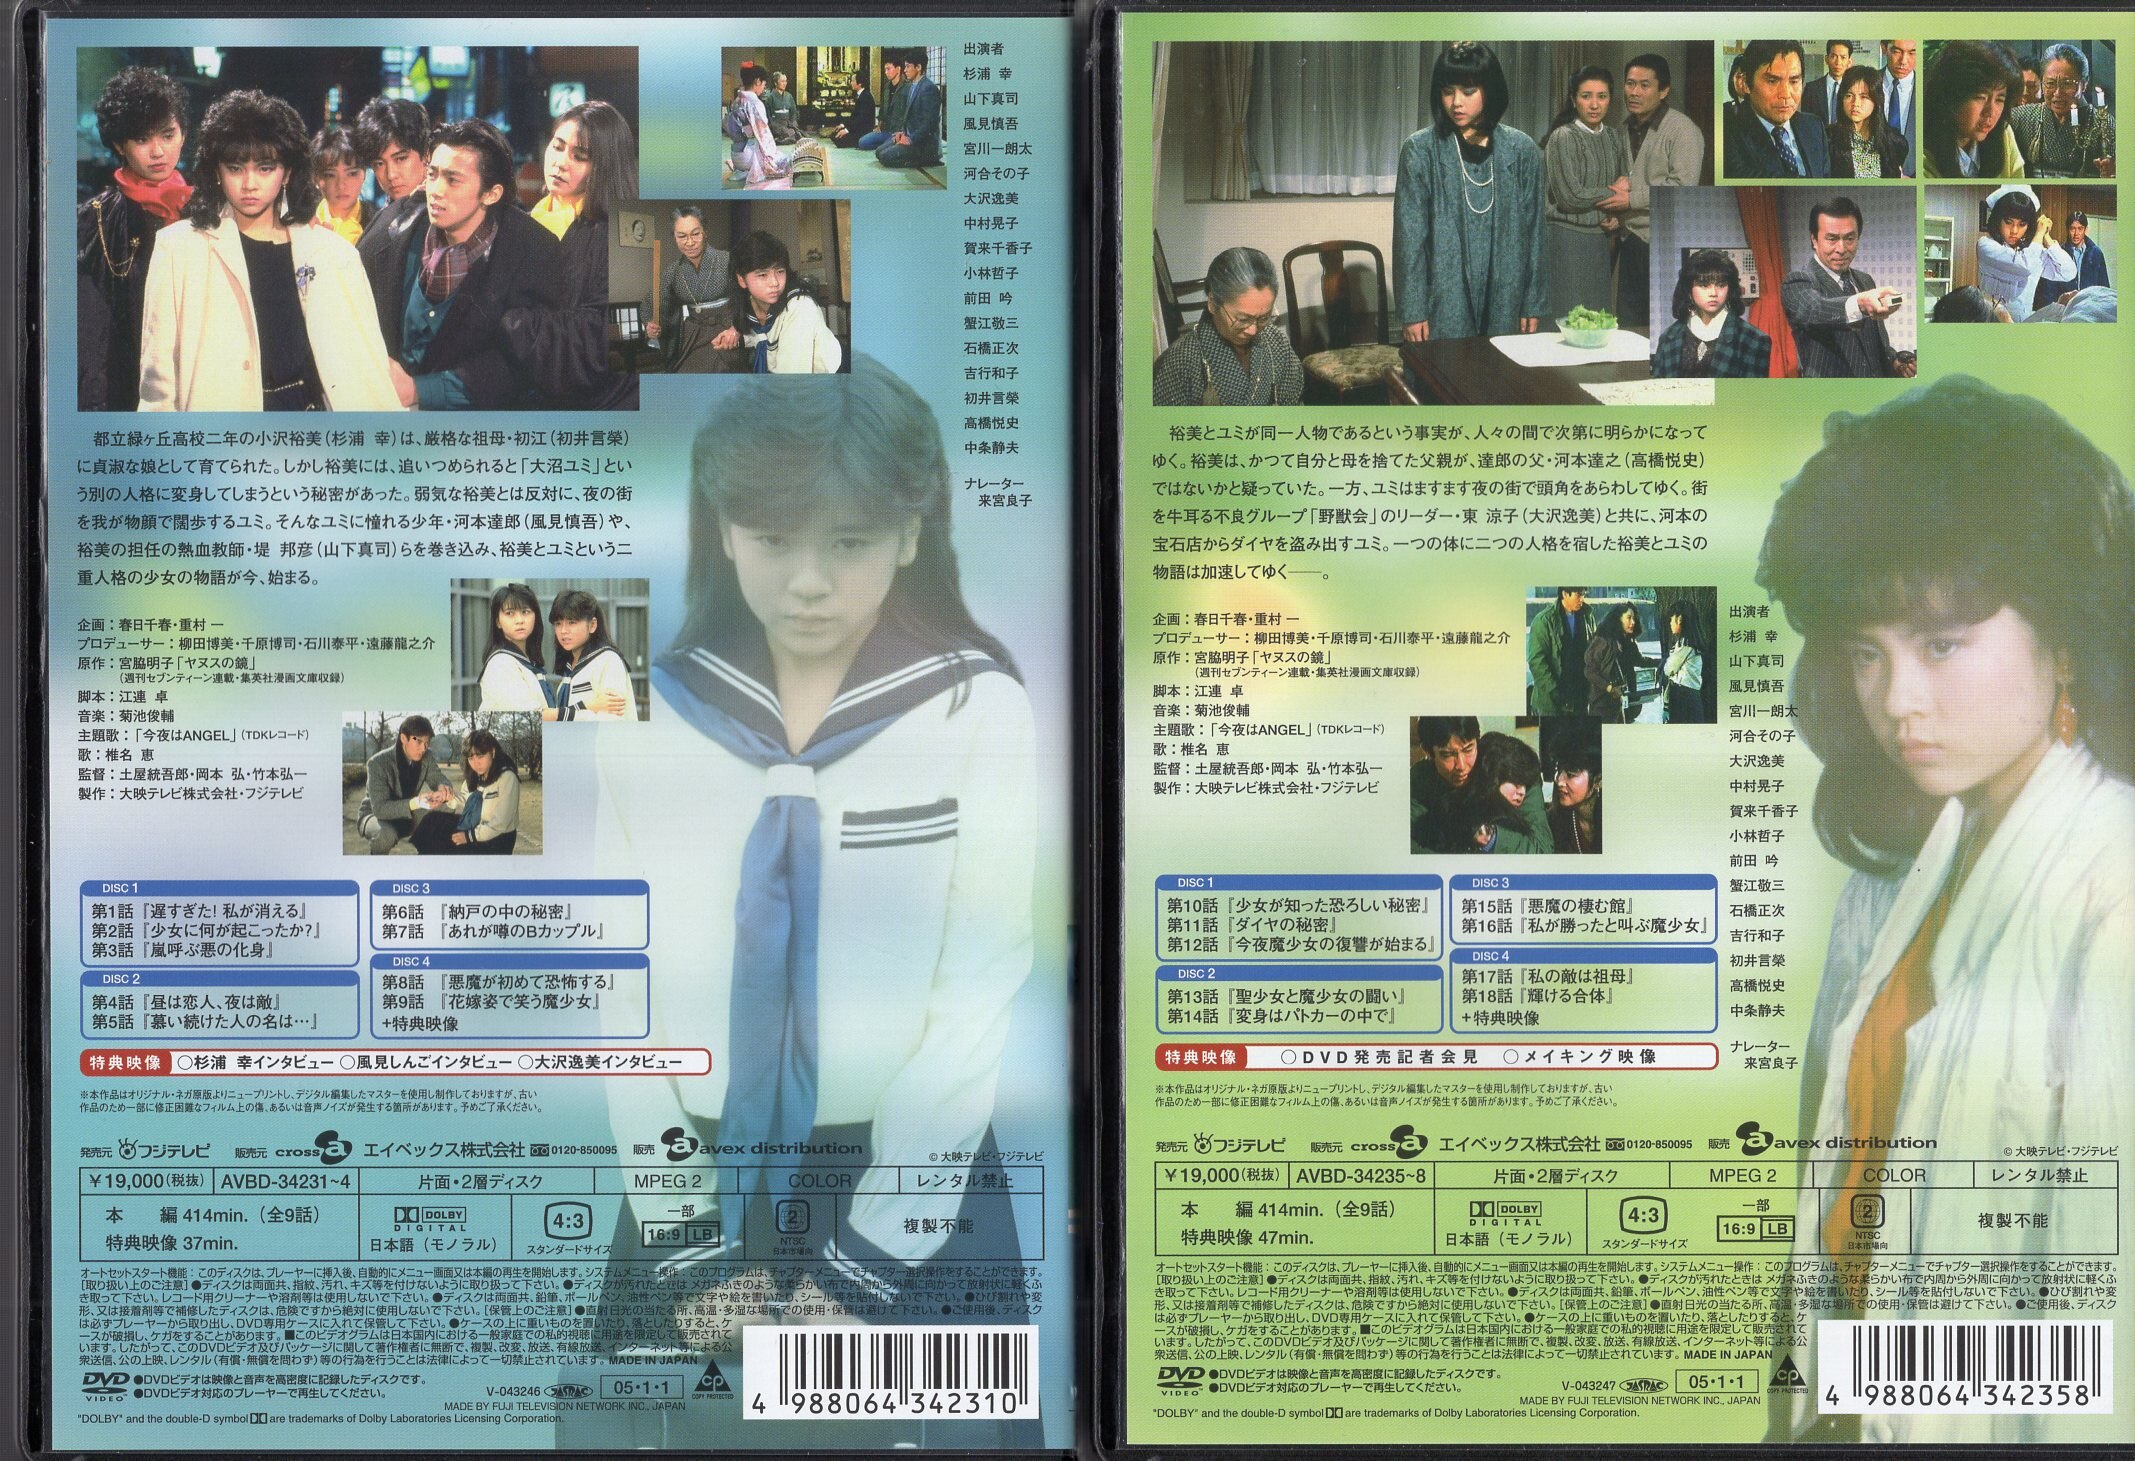 Avex Pictures Drama Dvd Janus Of The Mirror Before And After Knitting Set Mandarake Online Shop